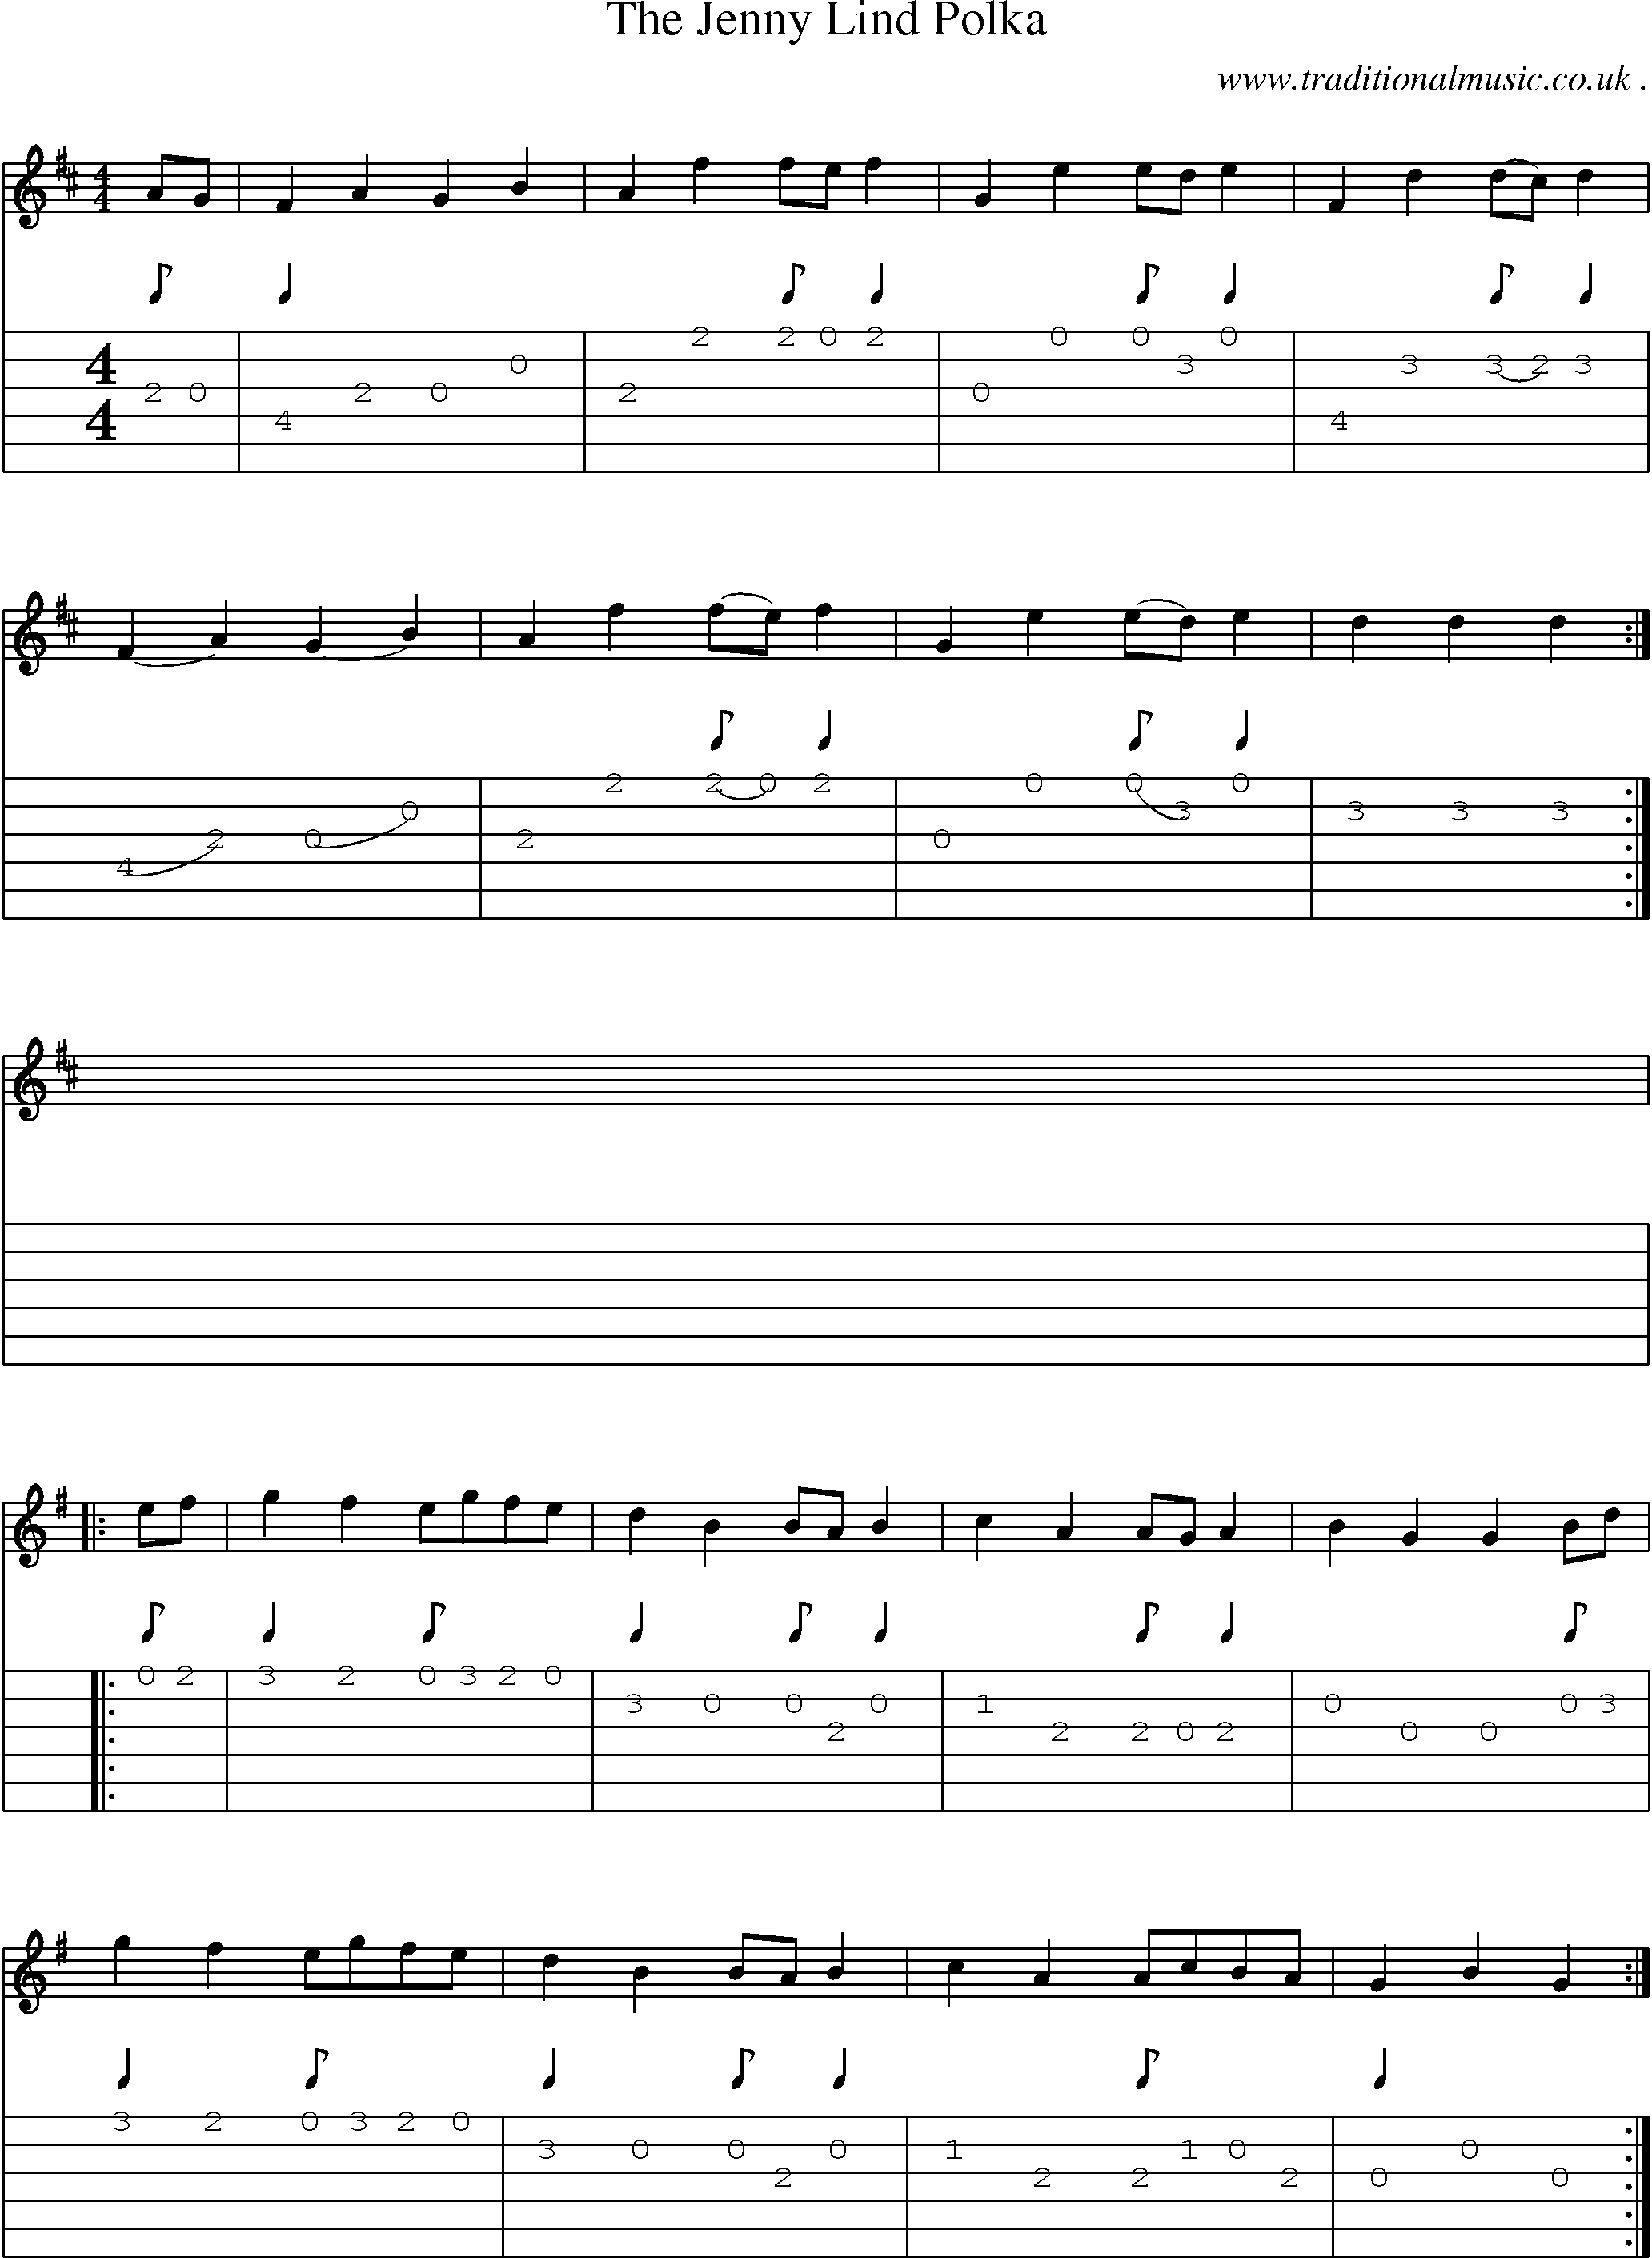 Sheet-Music and Guitar Tabs for The Jenny Lind Polka